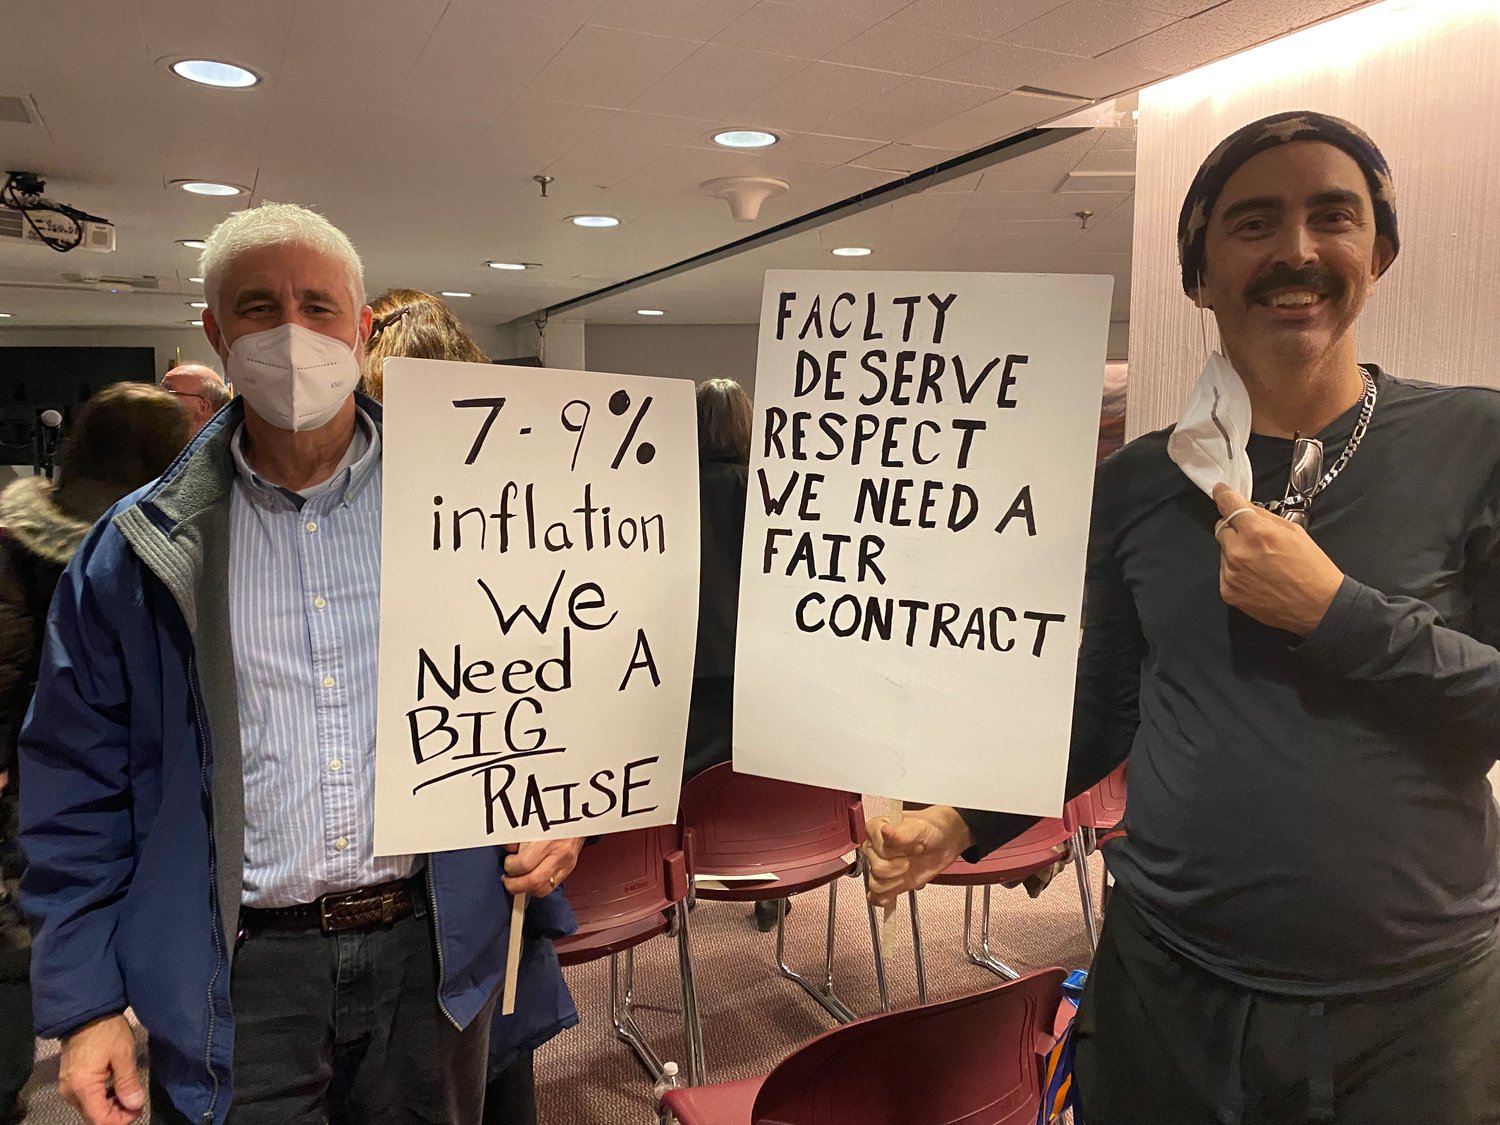 Professor Ricardo Santos and Nassau Community College Federation of Teachers union vice president David Stern hold signs calling for the school’s board of trustees to offer full-time faculty members what they consider to be fair contracts.